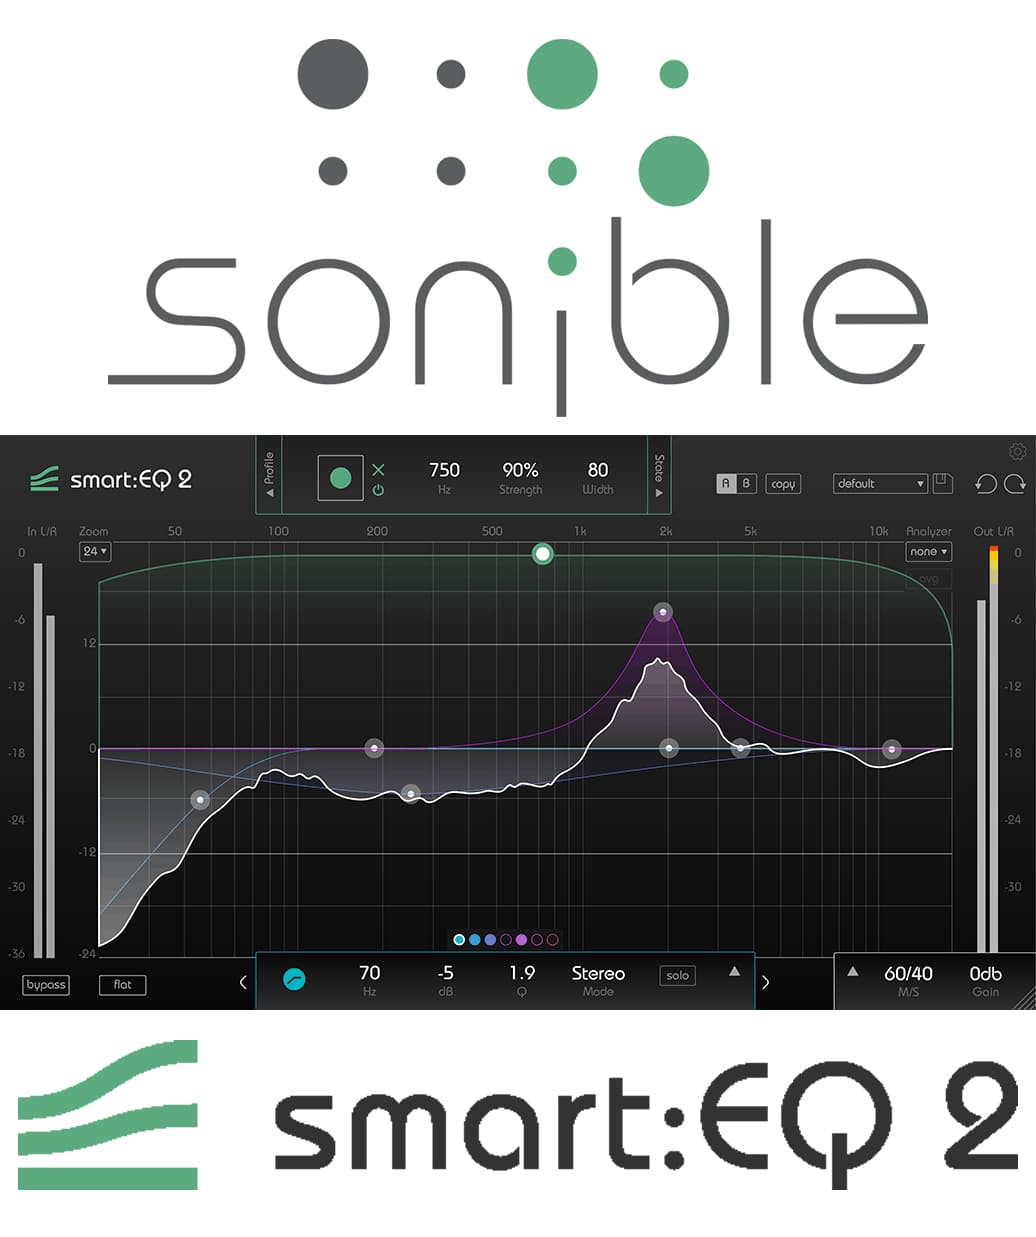 55% off “smart:EQ 2” by Sonible